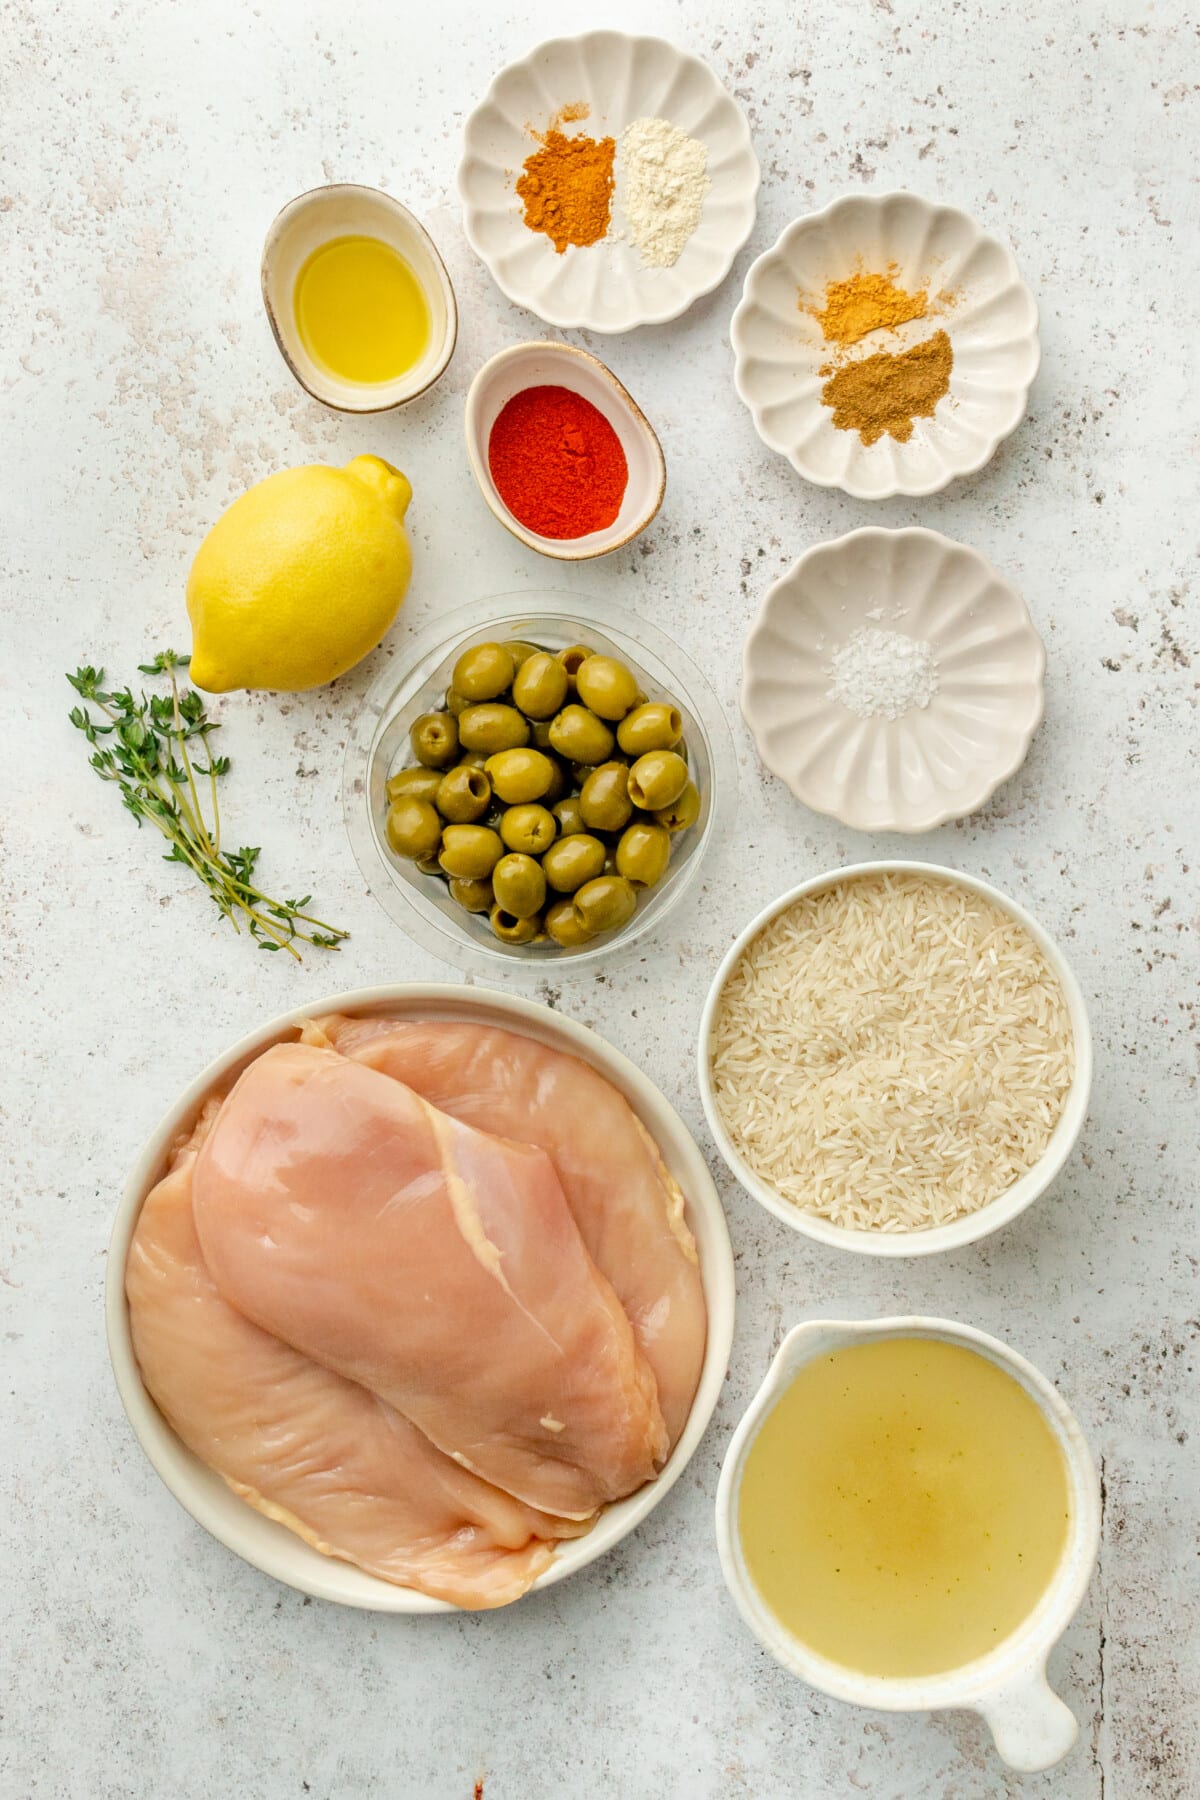 Ingredients for Moroccan inspired chicken with rice sit in a variety of plates and bowls on a light grey surface.